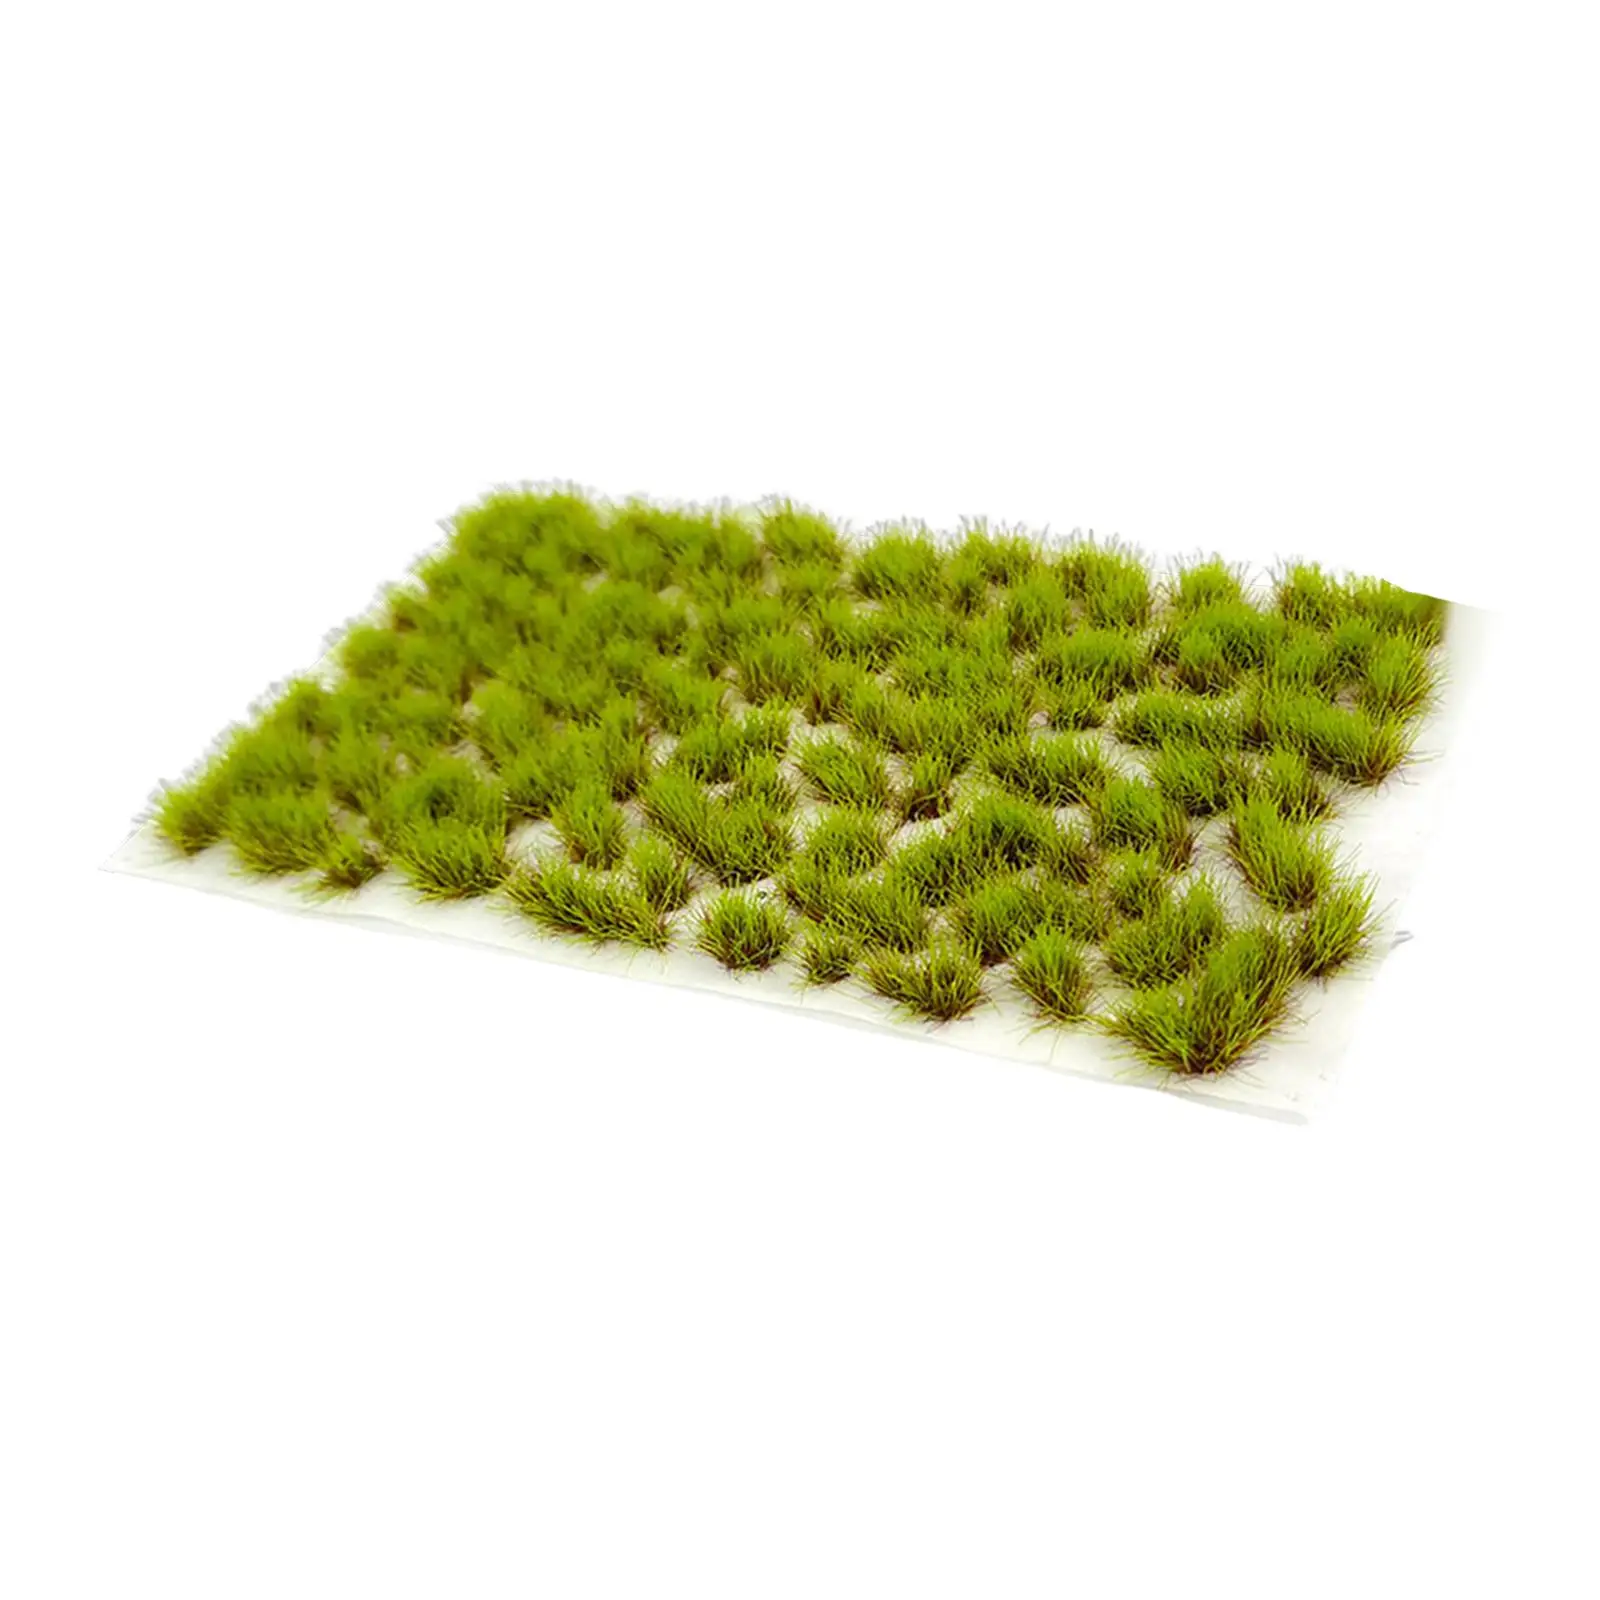 95x Large Cluster Grass Train Sand Table Model Material for DIY Landscape